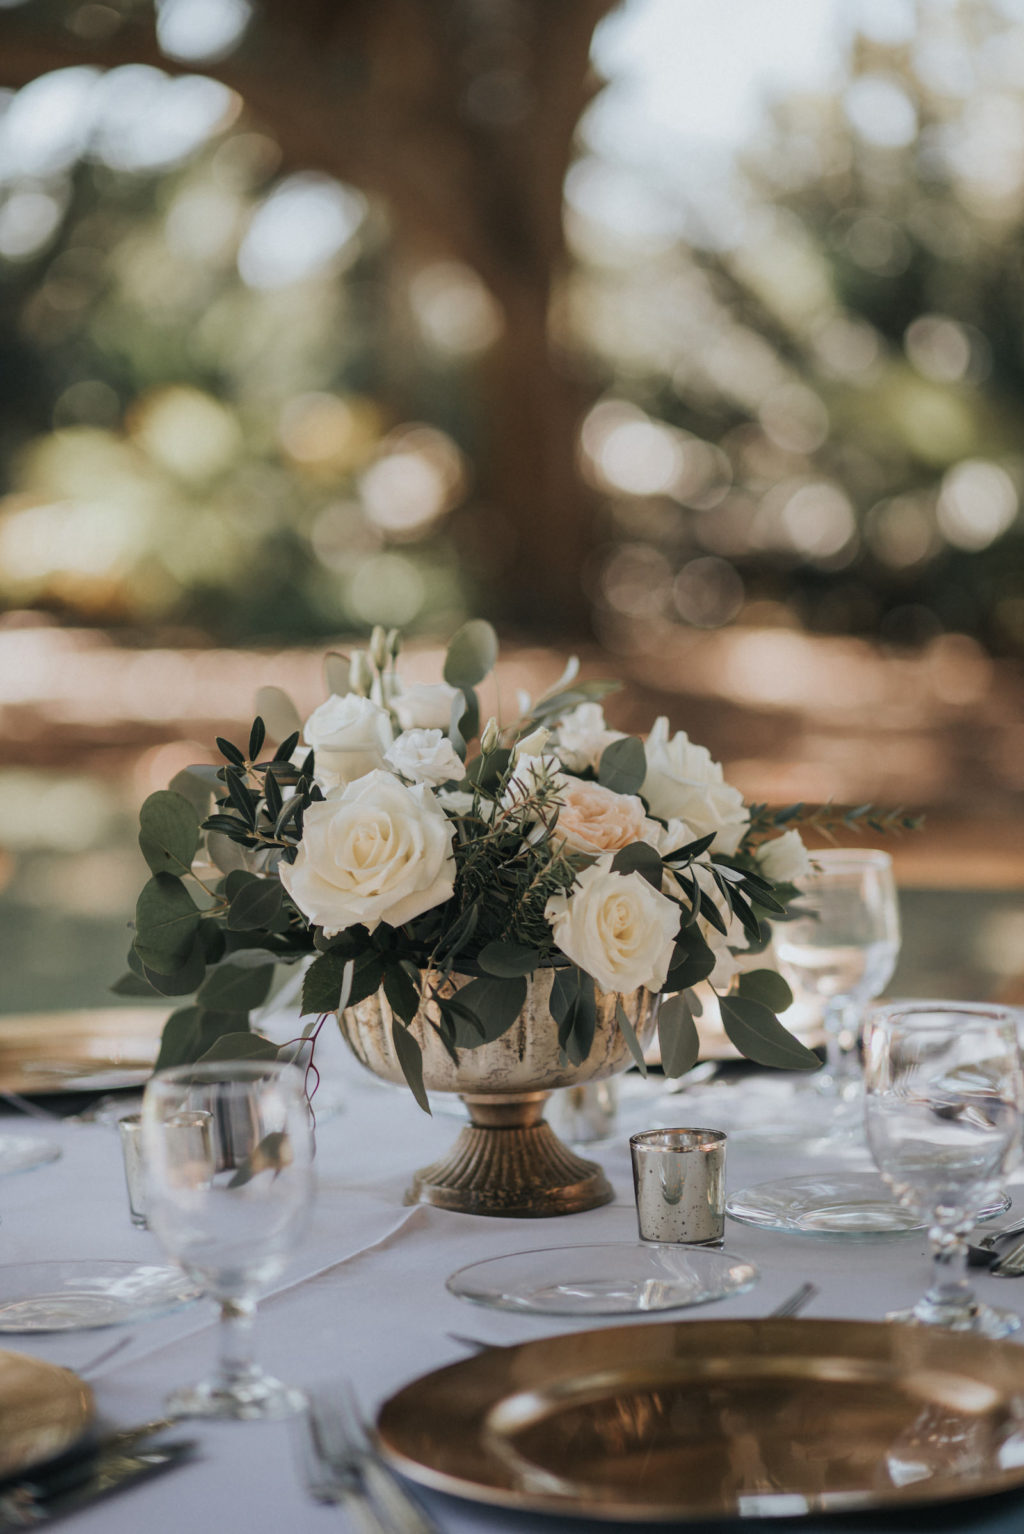 White and Ivory Centerpieces with Greenery with Gold Chargers | Romantic Rustic Outdoor Garden Wedding Reception with White Linens